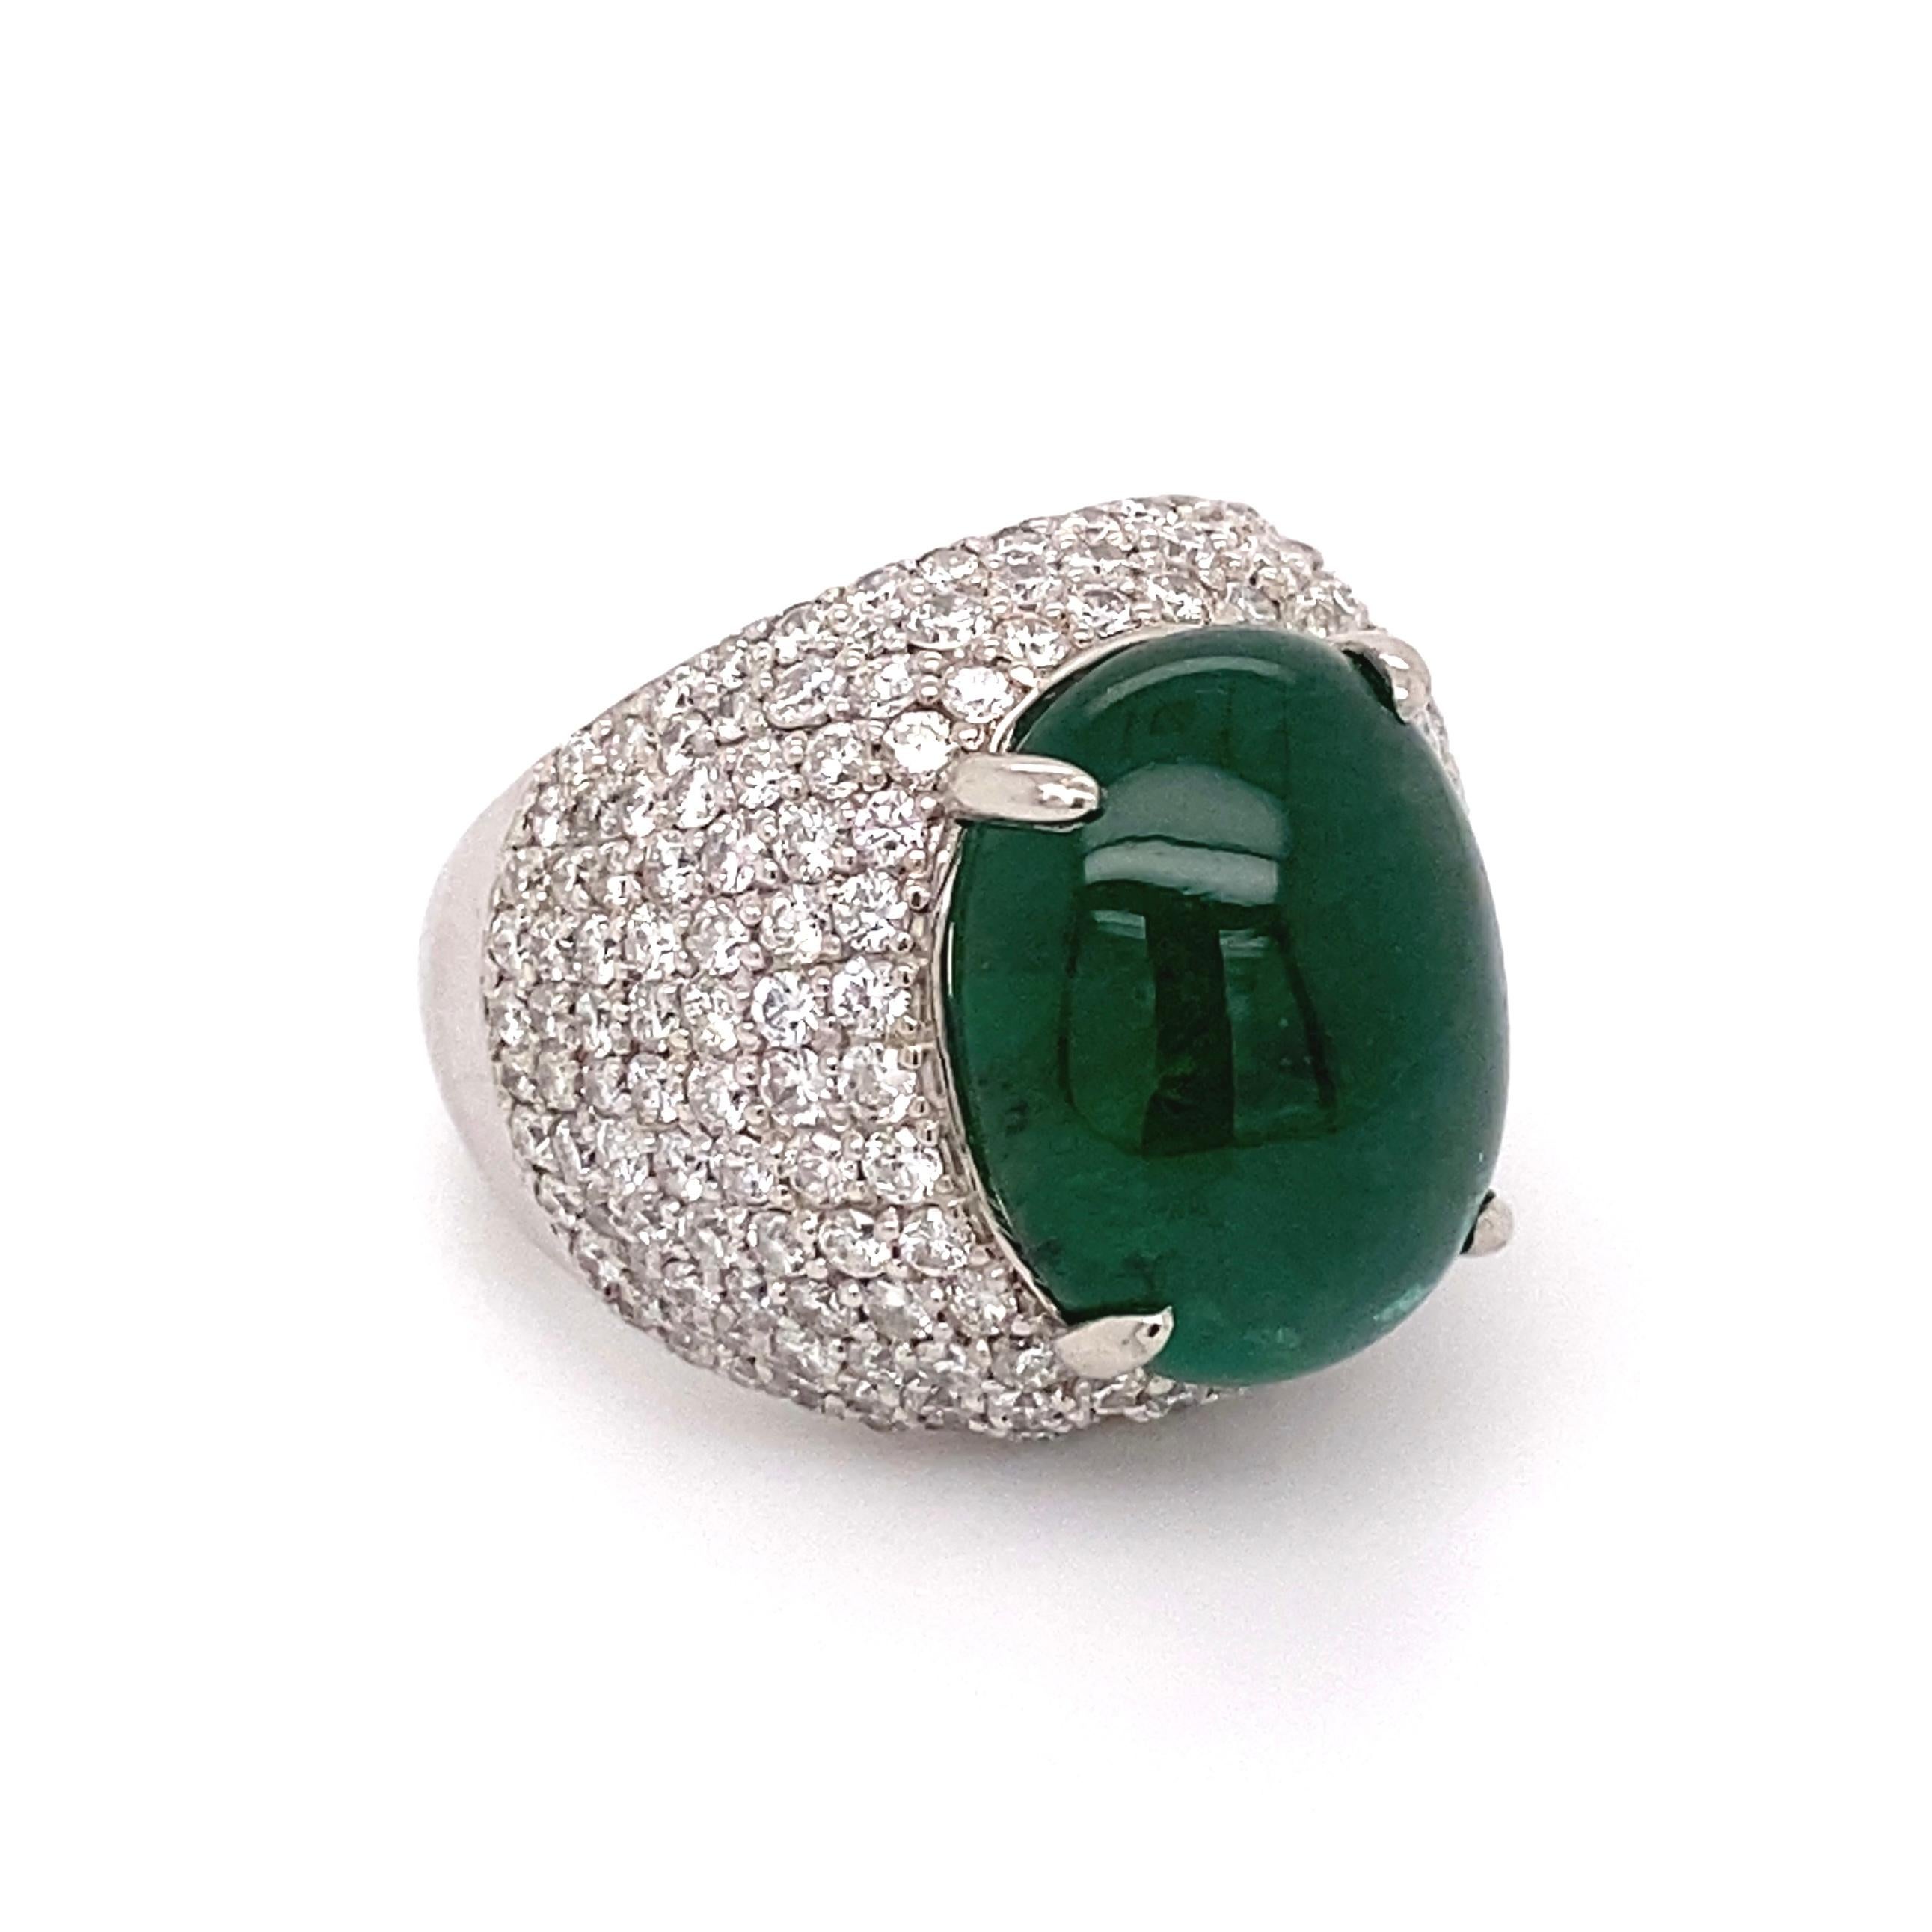 Simply Fabulous! Emerald and Diamond Dome Cocktail Ring, centering a securely nestled 9.51 Carat Cabochon Emerald, GIA certificate #2221156918 surrounded by Pave Hand set Diamonds, weighing approx. 2.65tcw. Hand crafted Platinum mounting. Approx.